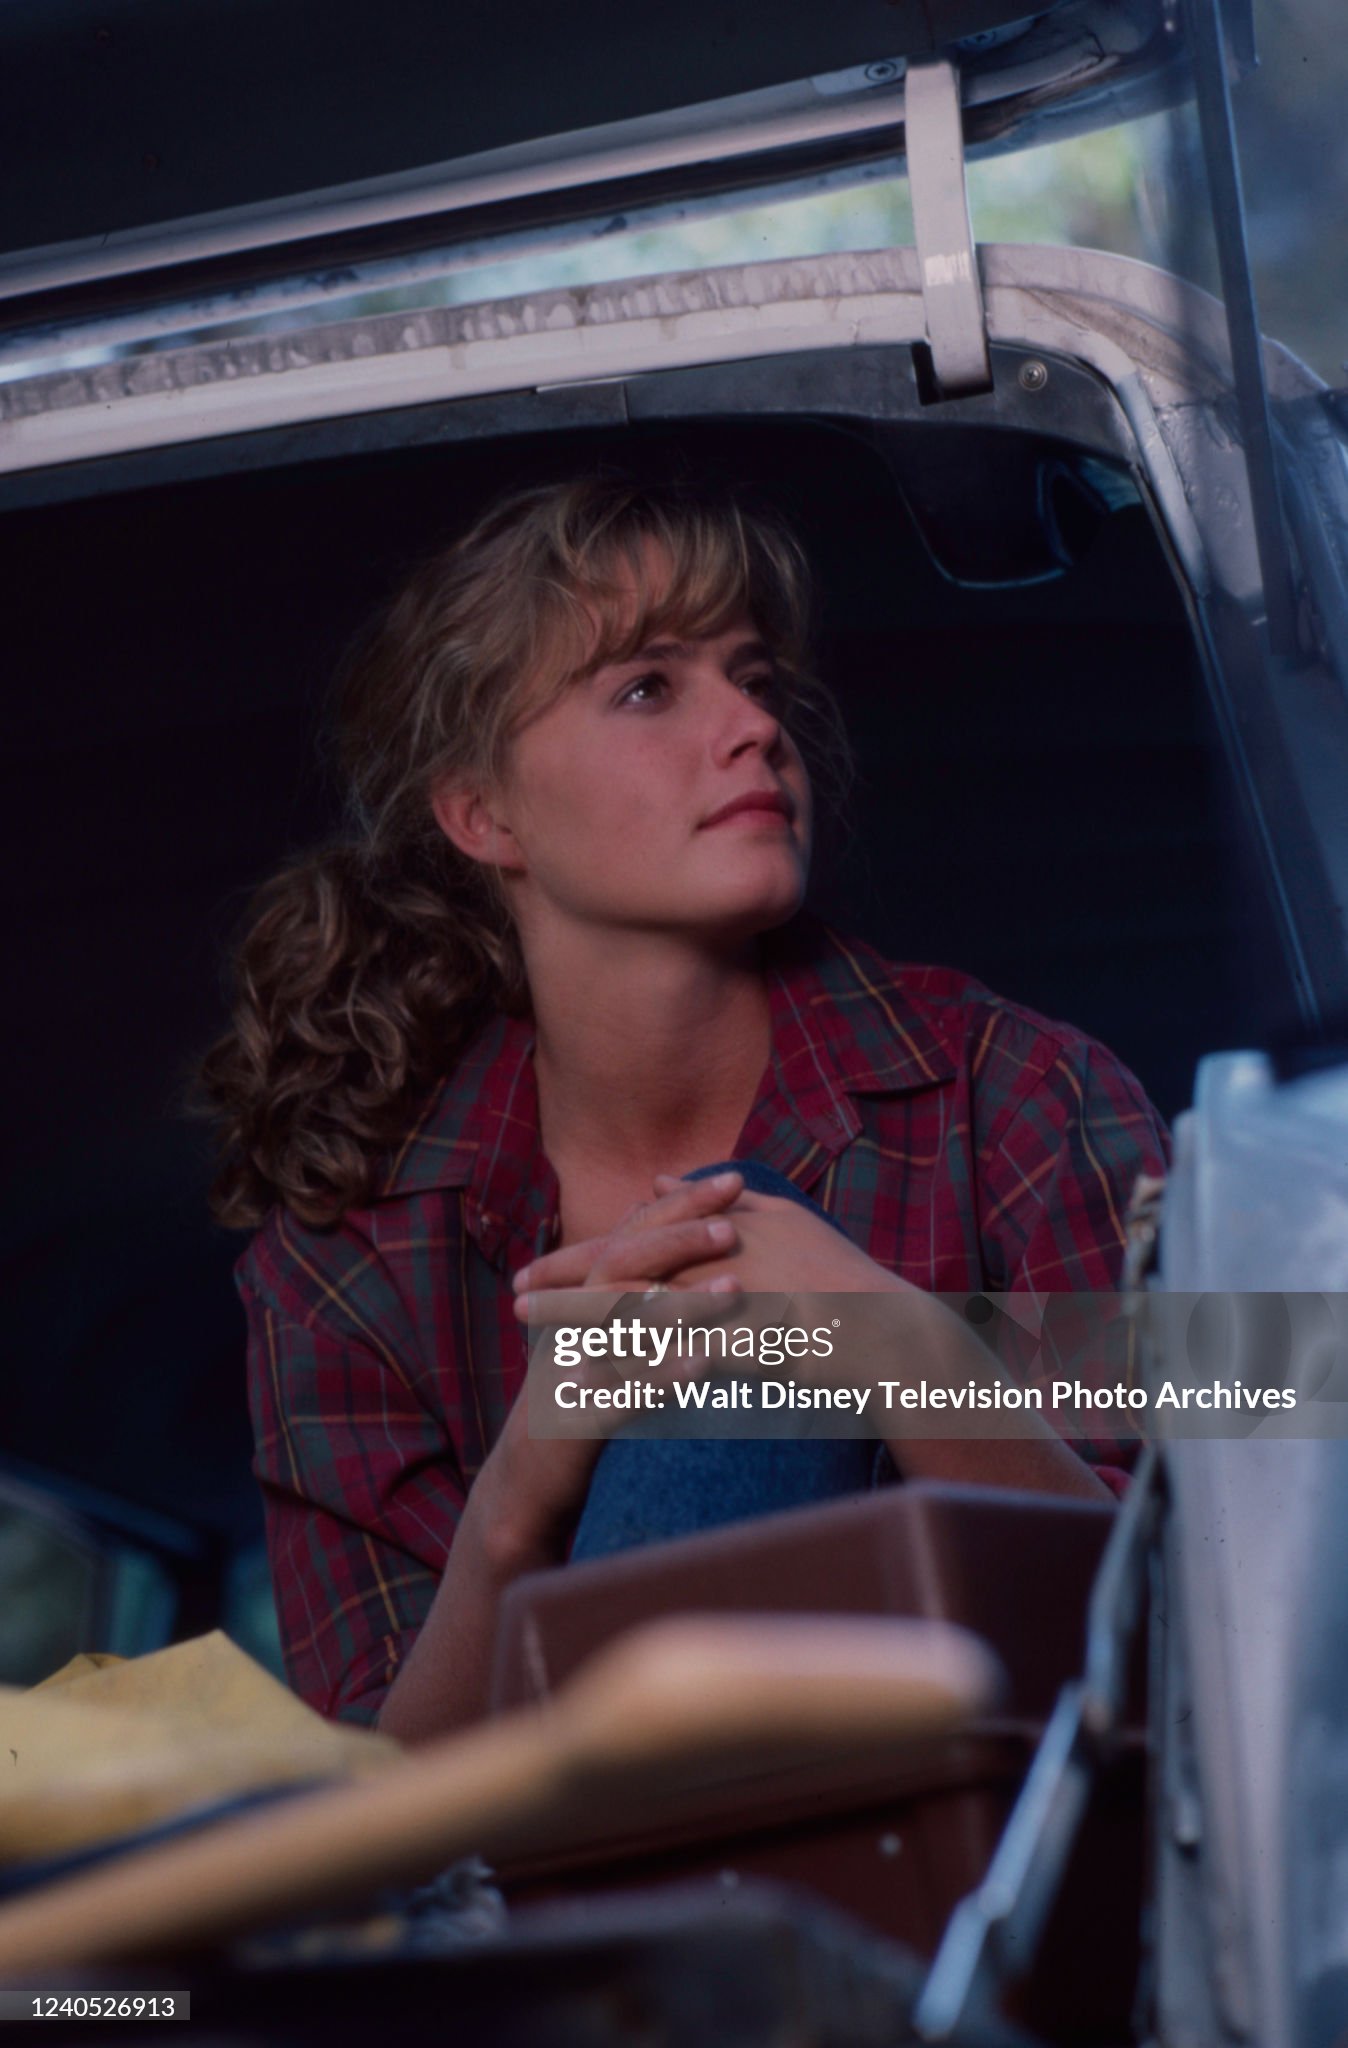 elisabeth-shue-appearing-in-call-to-glory.jpg